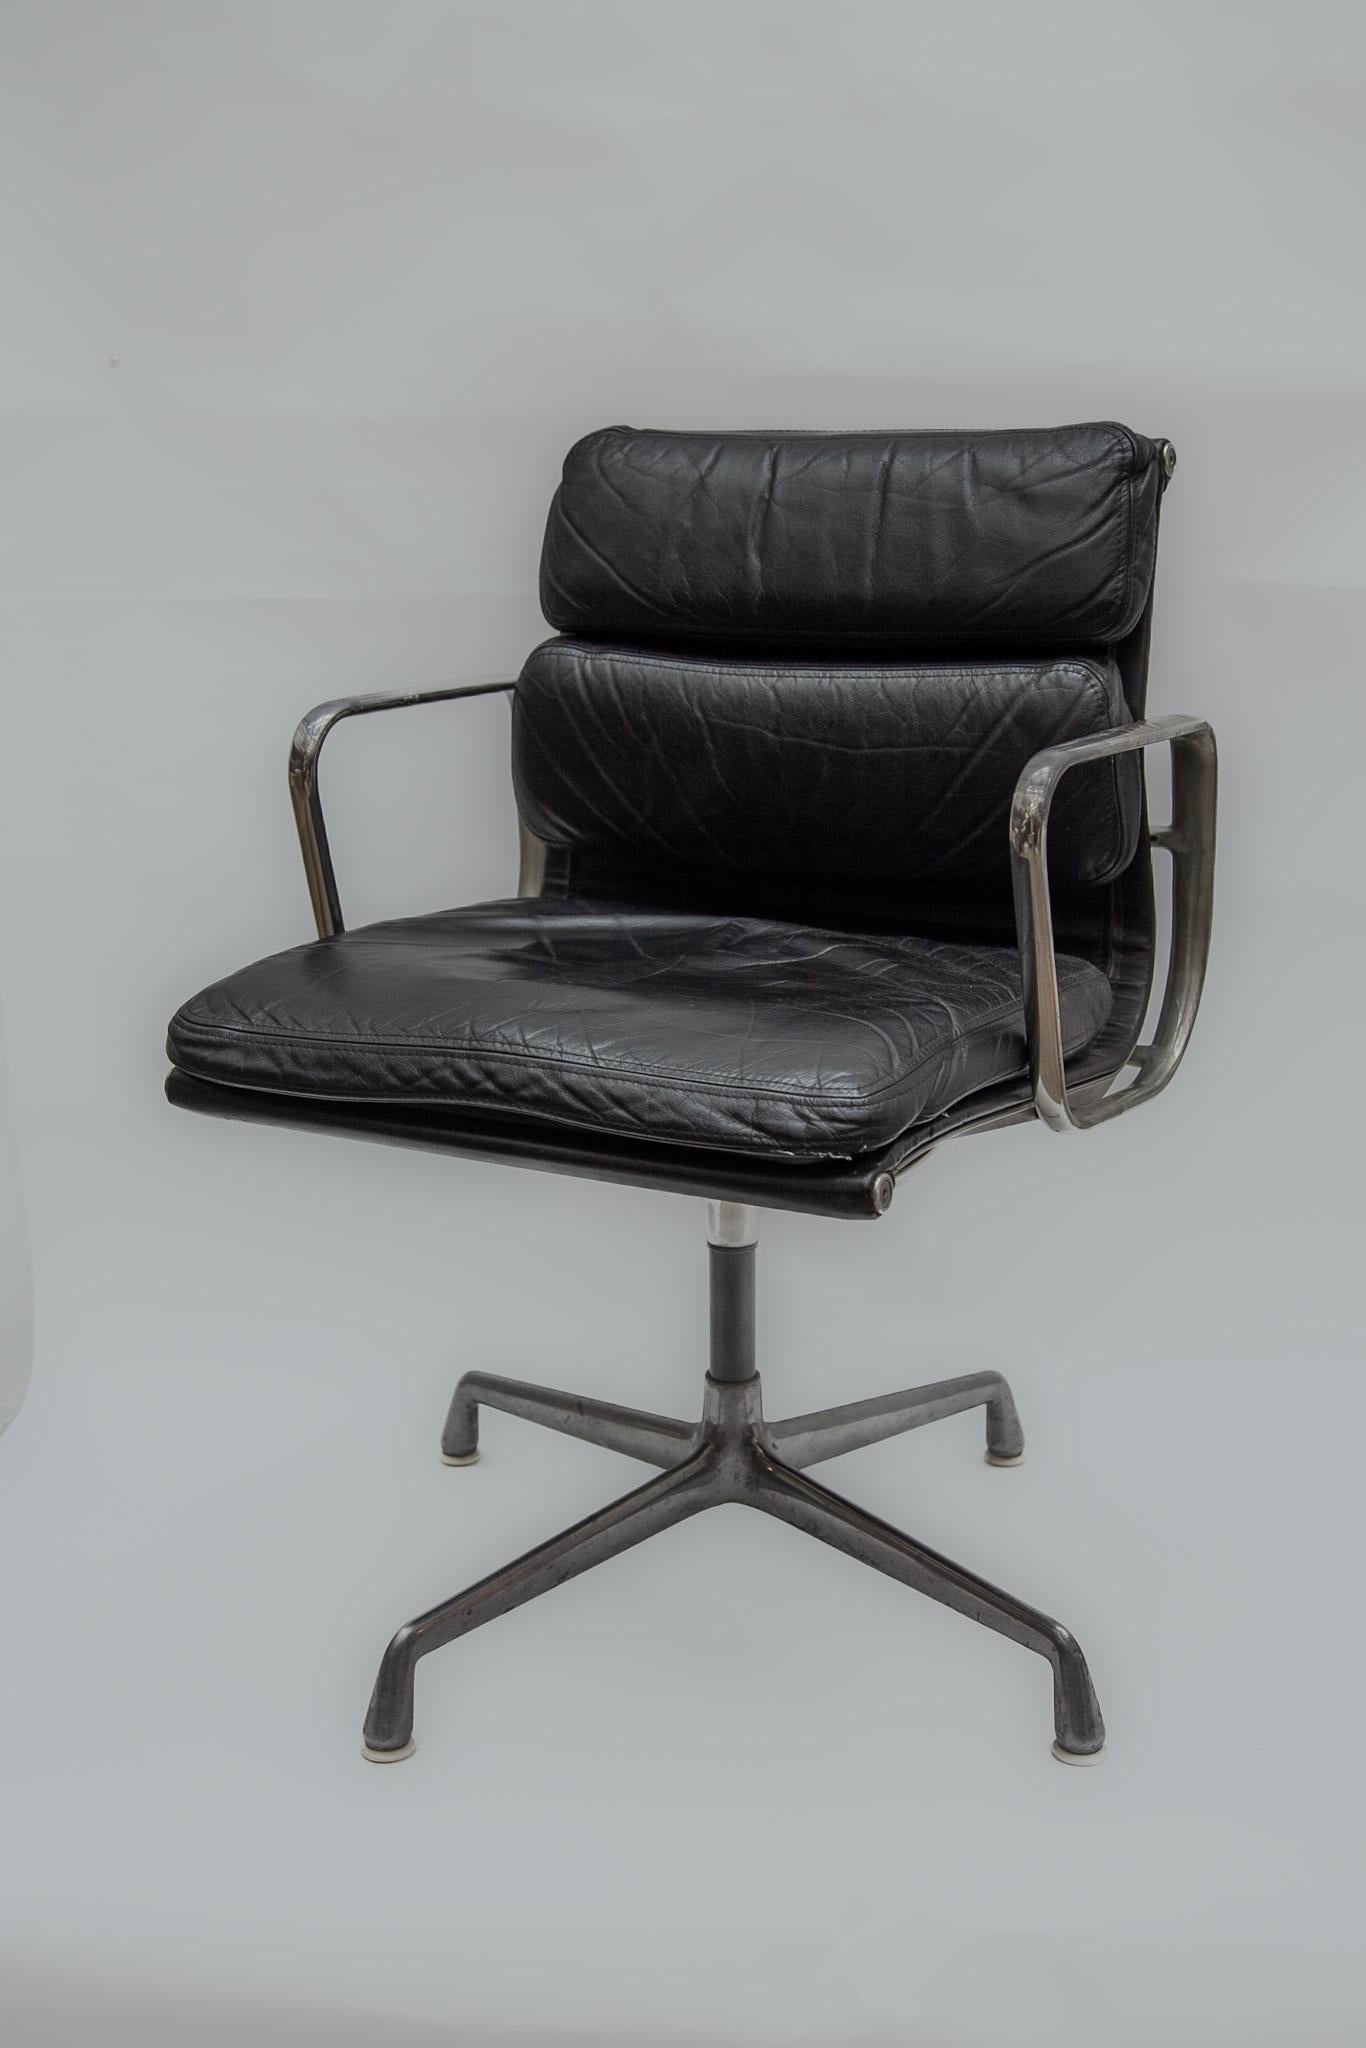 Iconic vintage black leather soft pad aluminium group desk arm chair designed by Charles and Ray Eames for Herman Miller in the 1960s. 
In original good vintage condition. The leather has a nice patina. The arms with signs of use see photo. The